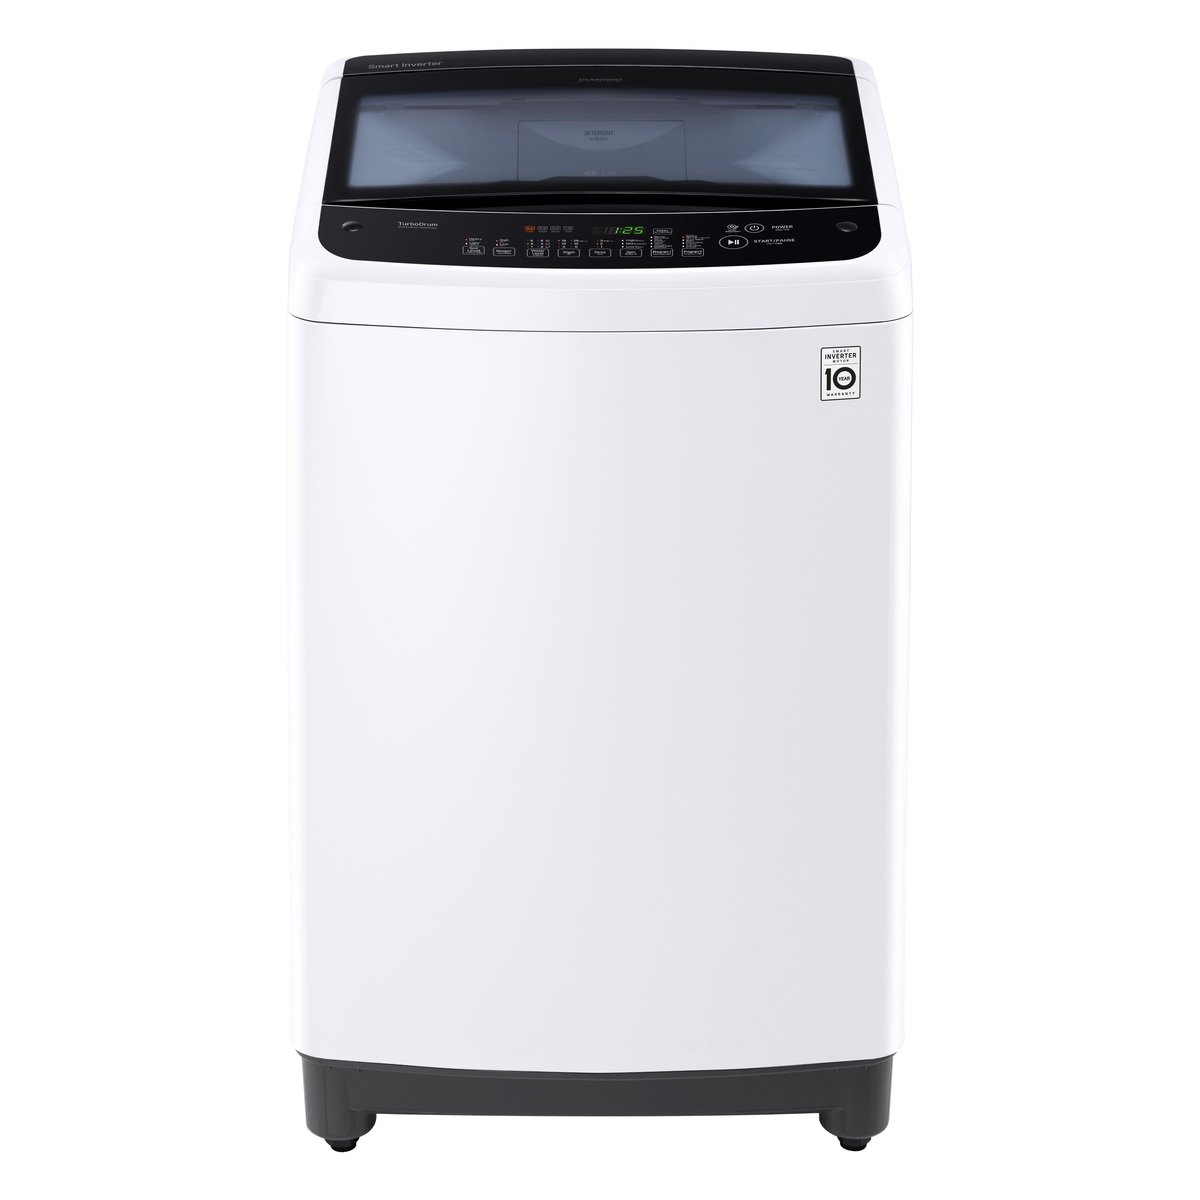 LG Fully Automatic Top Load Washer T9588NEHVA 9Kg